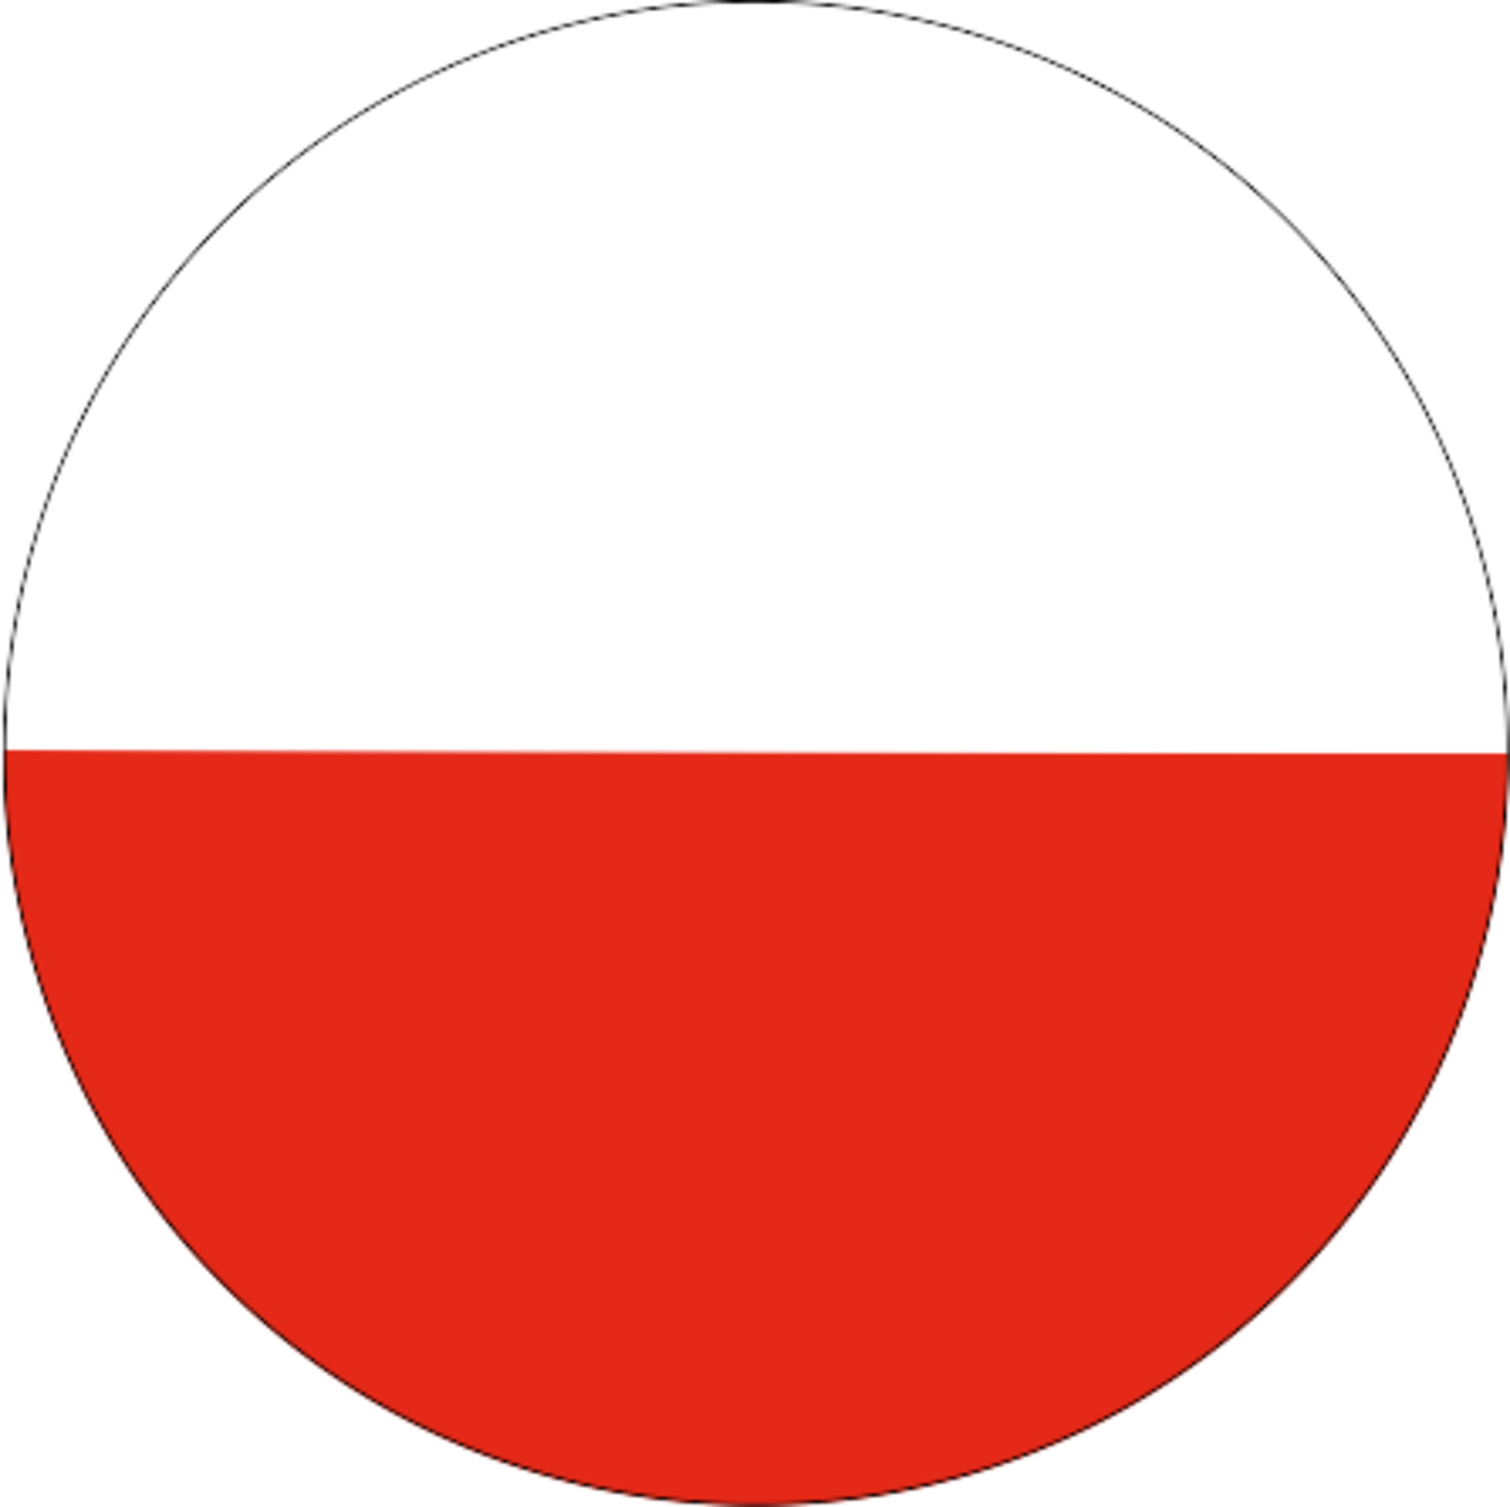 Flag of Poland in a circle